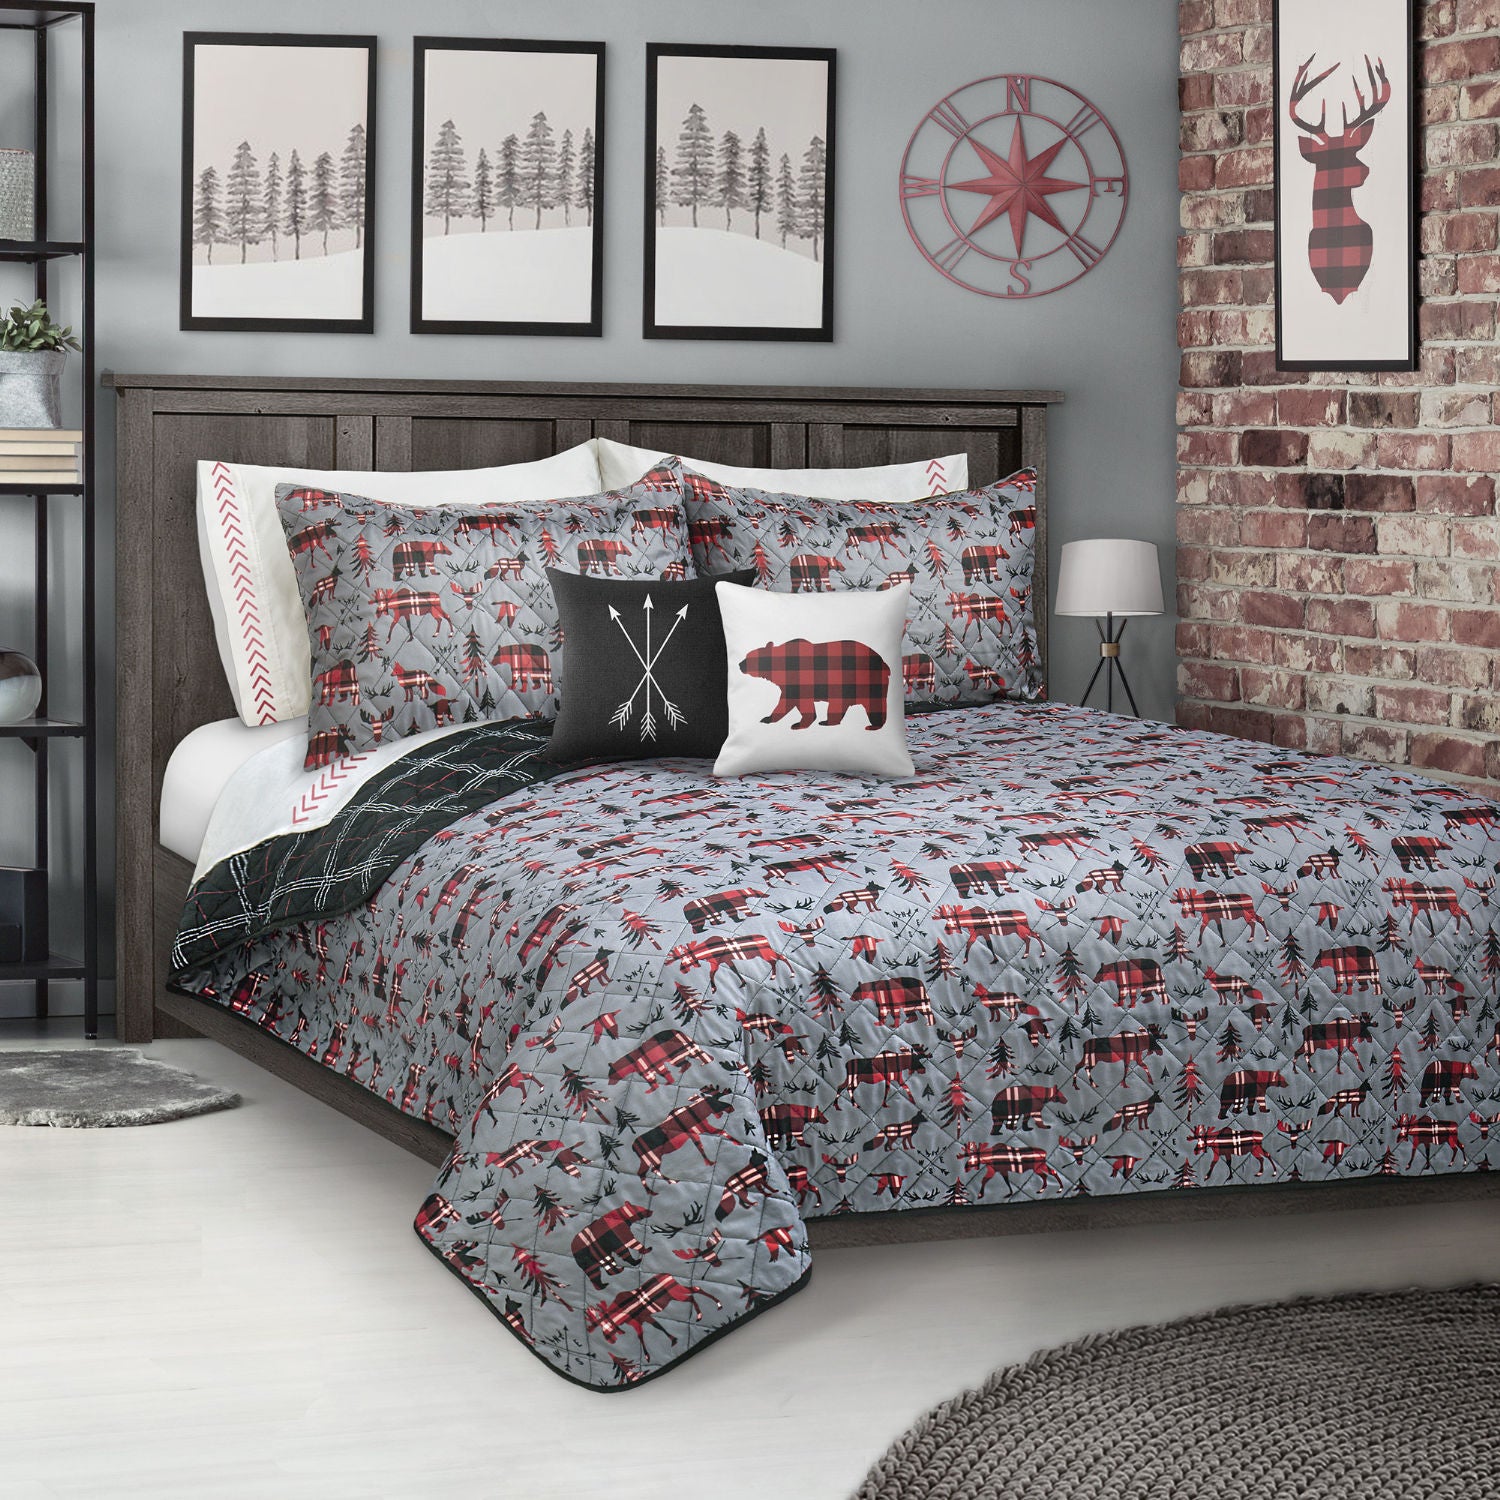 Woven Printed Quilt Bedding Set 3 Piece Double/Queen -Wild & Free (Ddp Ecom Pack)